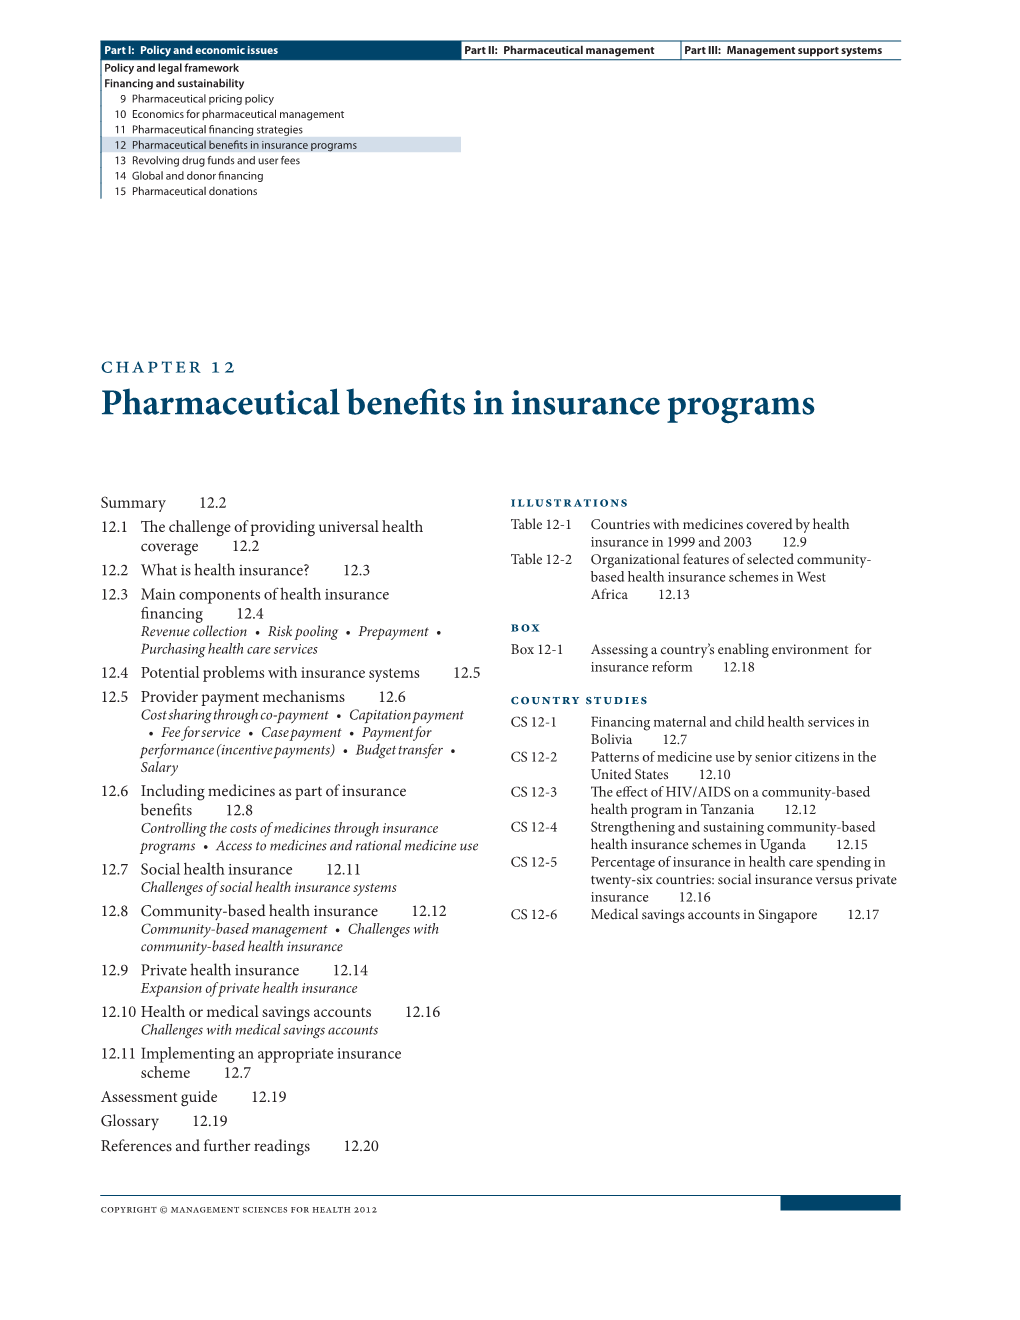 Pharmaceutical Benefits in Insurance Programs 13 Revolving Drug Funds and User Fees 14 Global and Donor Financing 15 Pharmaceutical Donations